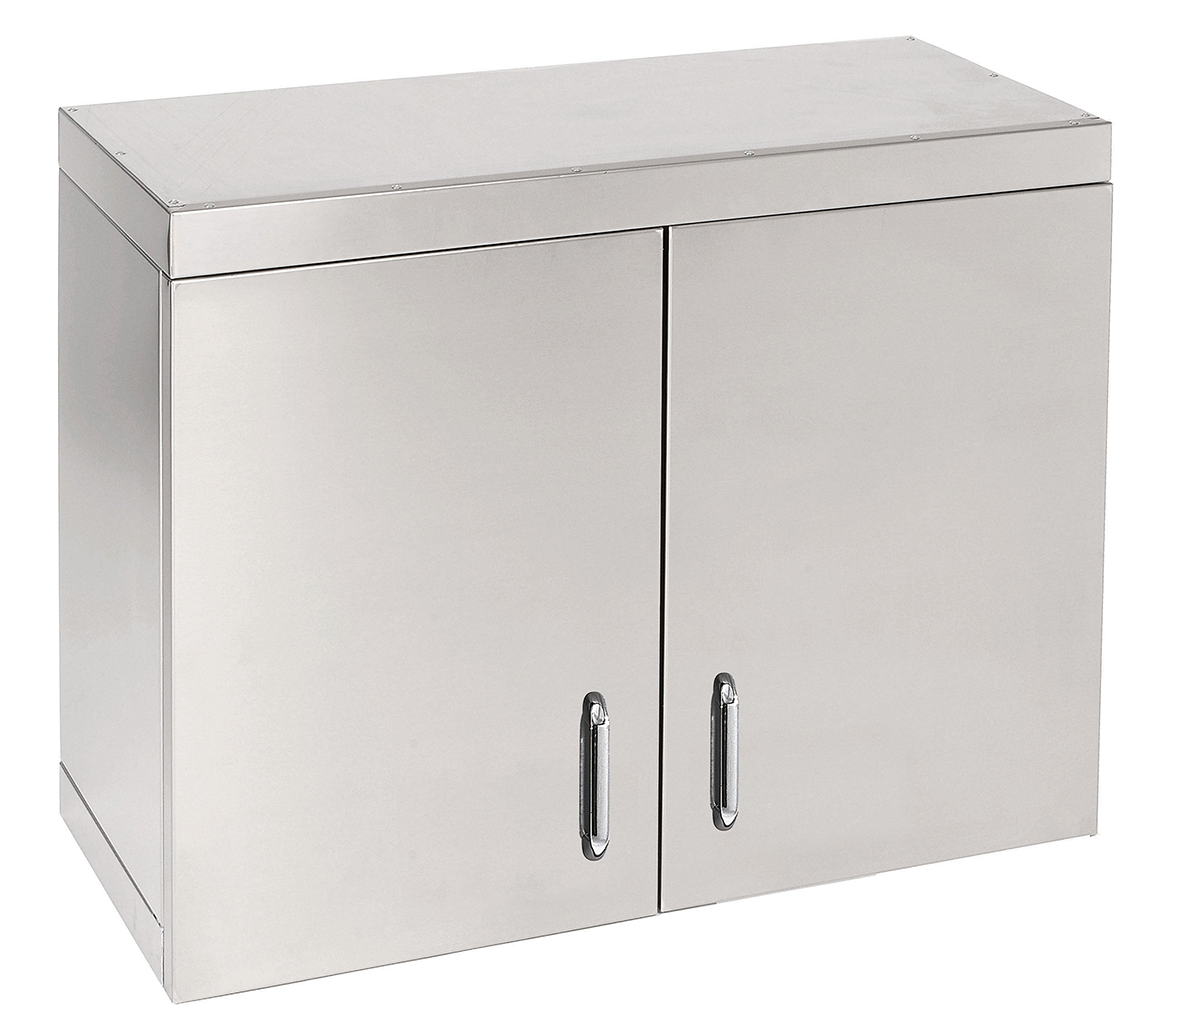 Parry WCH750 - Stainless Steel Hinged Double Door Wall Cupboard